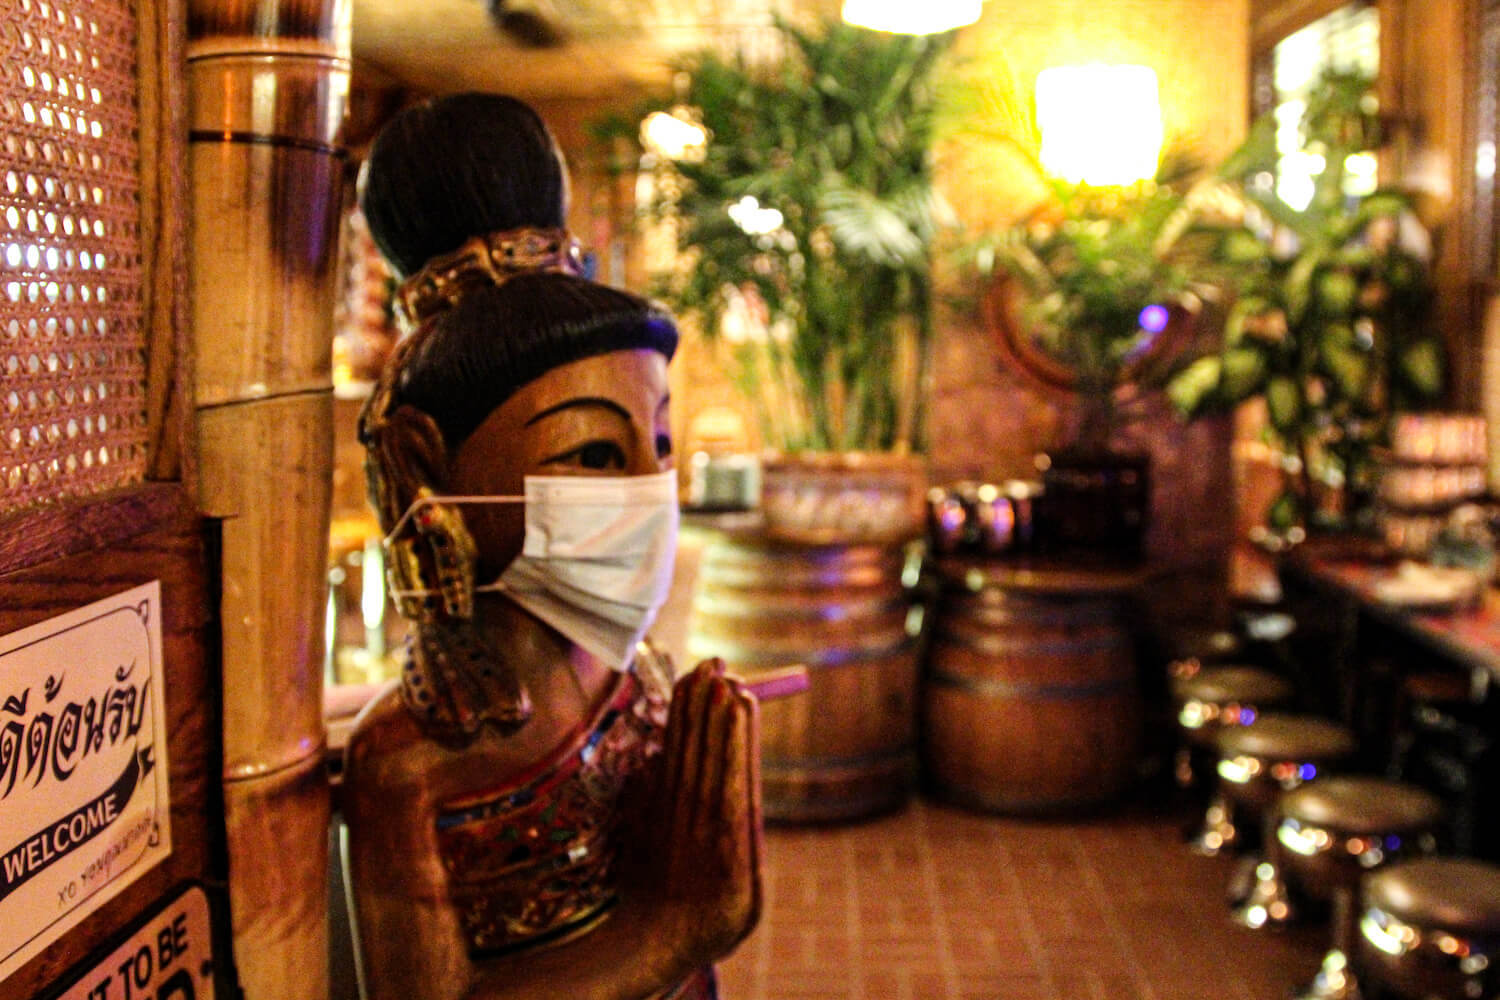 A statue wearing a mask at Thai Diner. December 2020